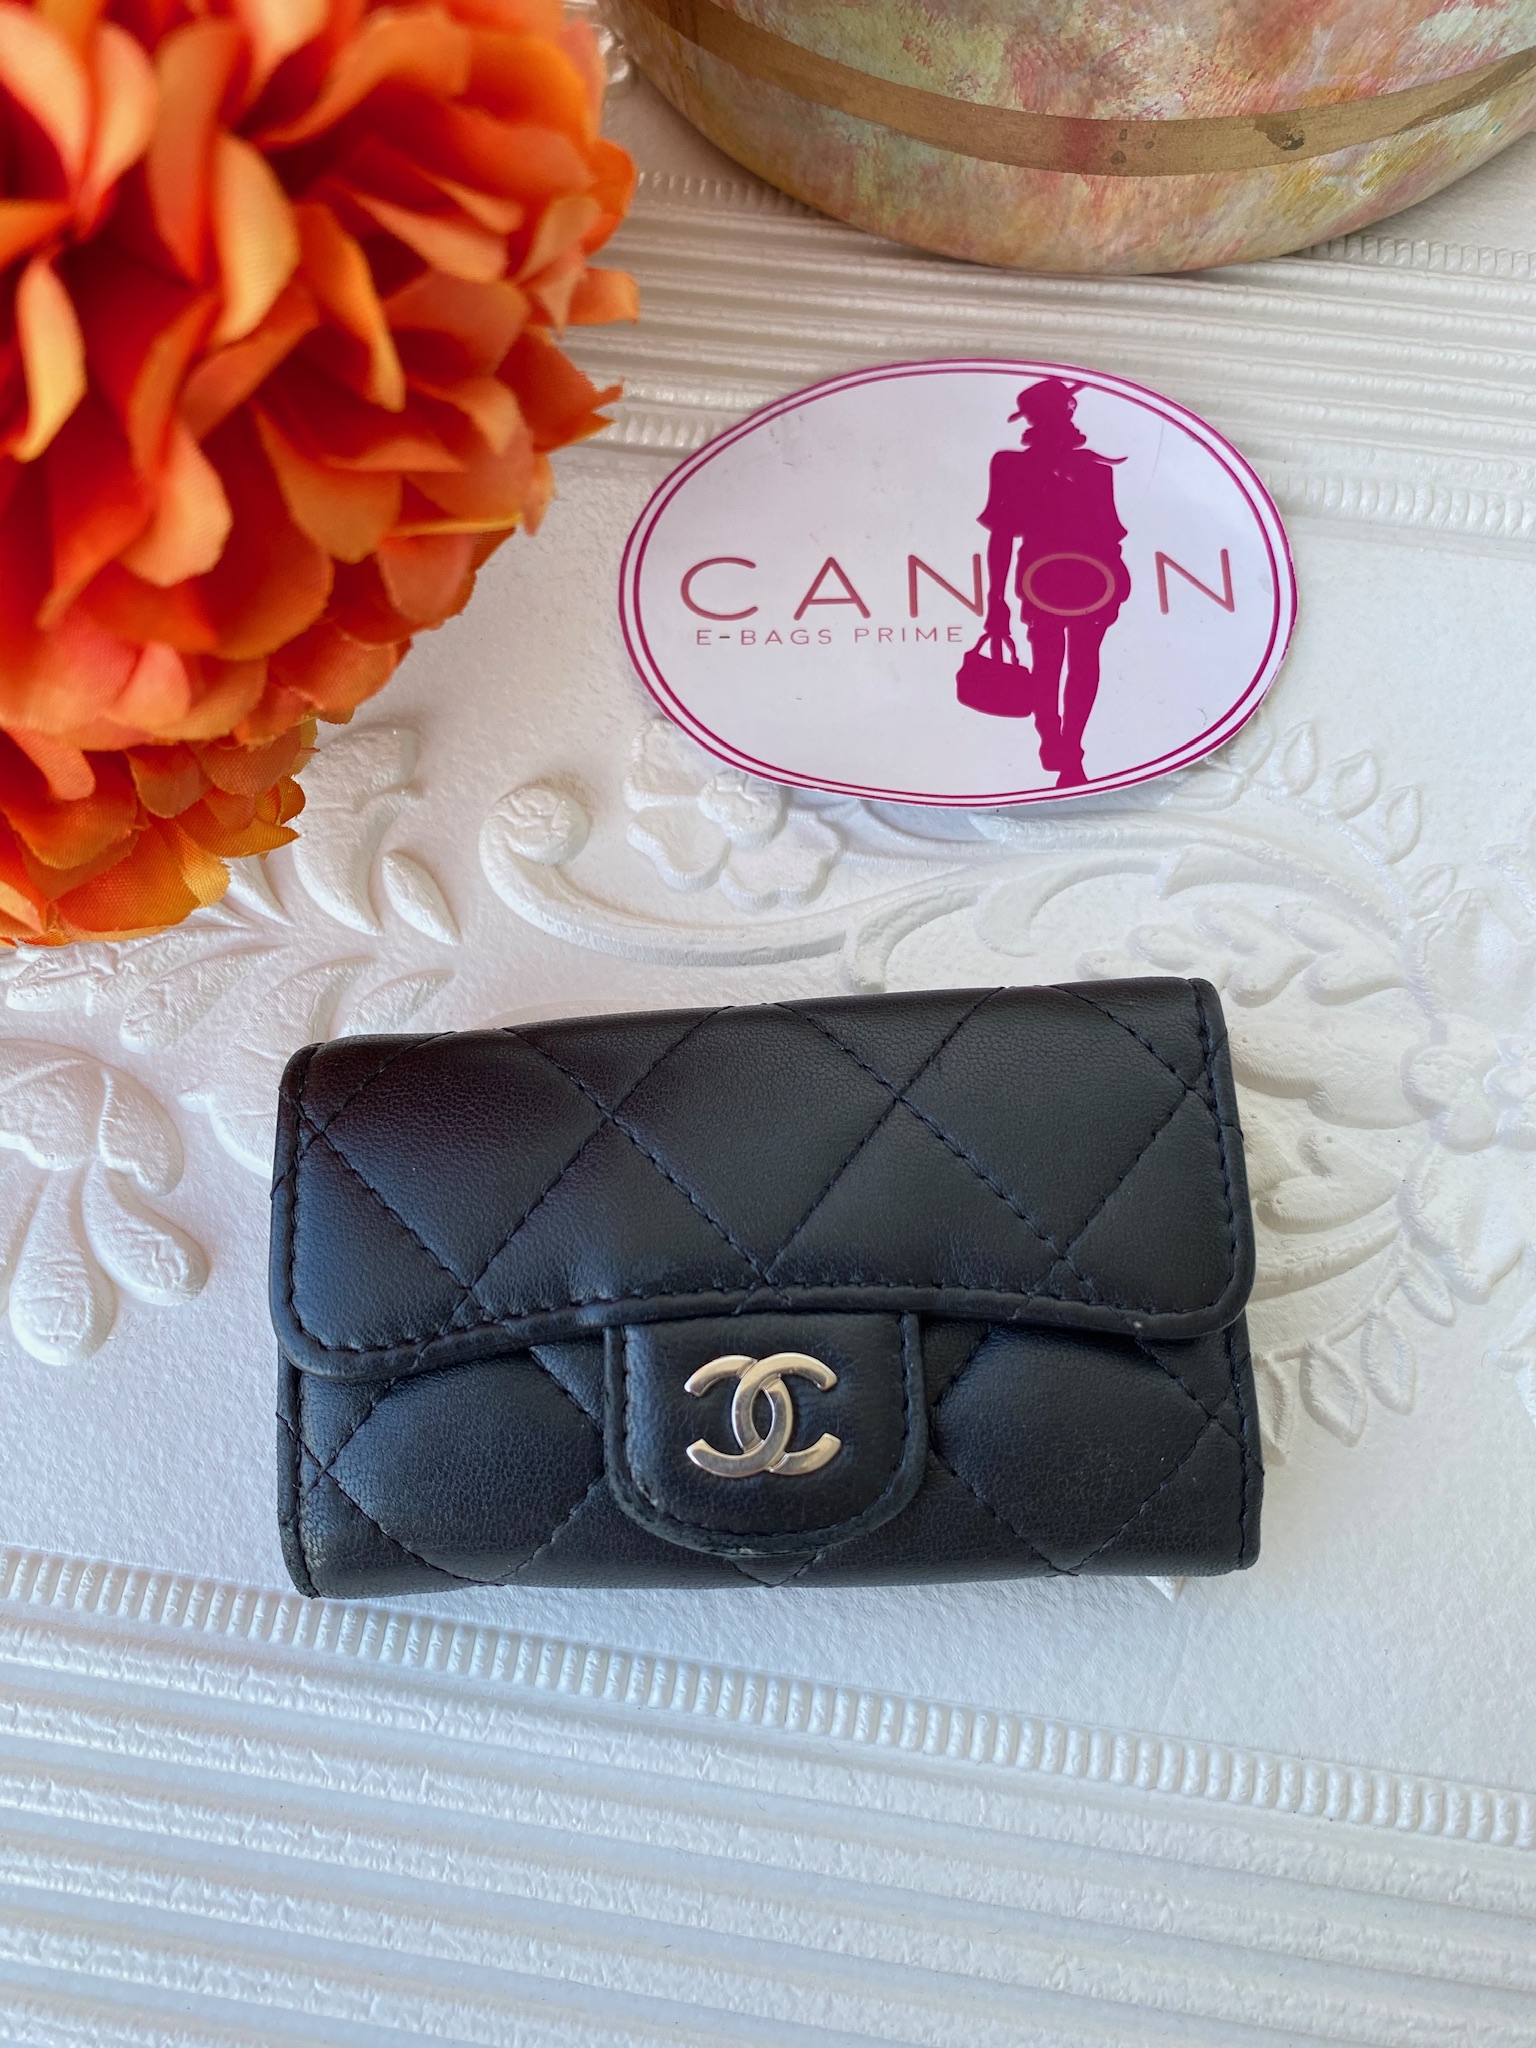 Chanel Black Quilted 6 Key Holder Lambskin. Made in Italy. Series 22xxx. -  Canon E-Bags Prime